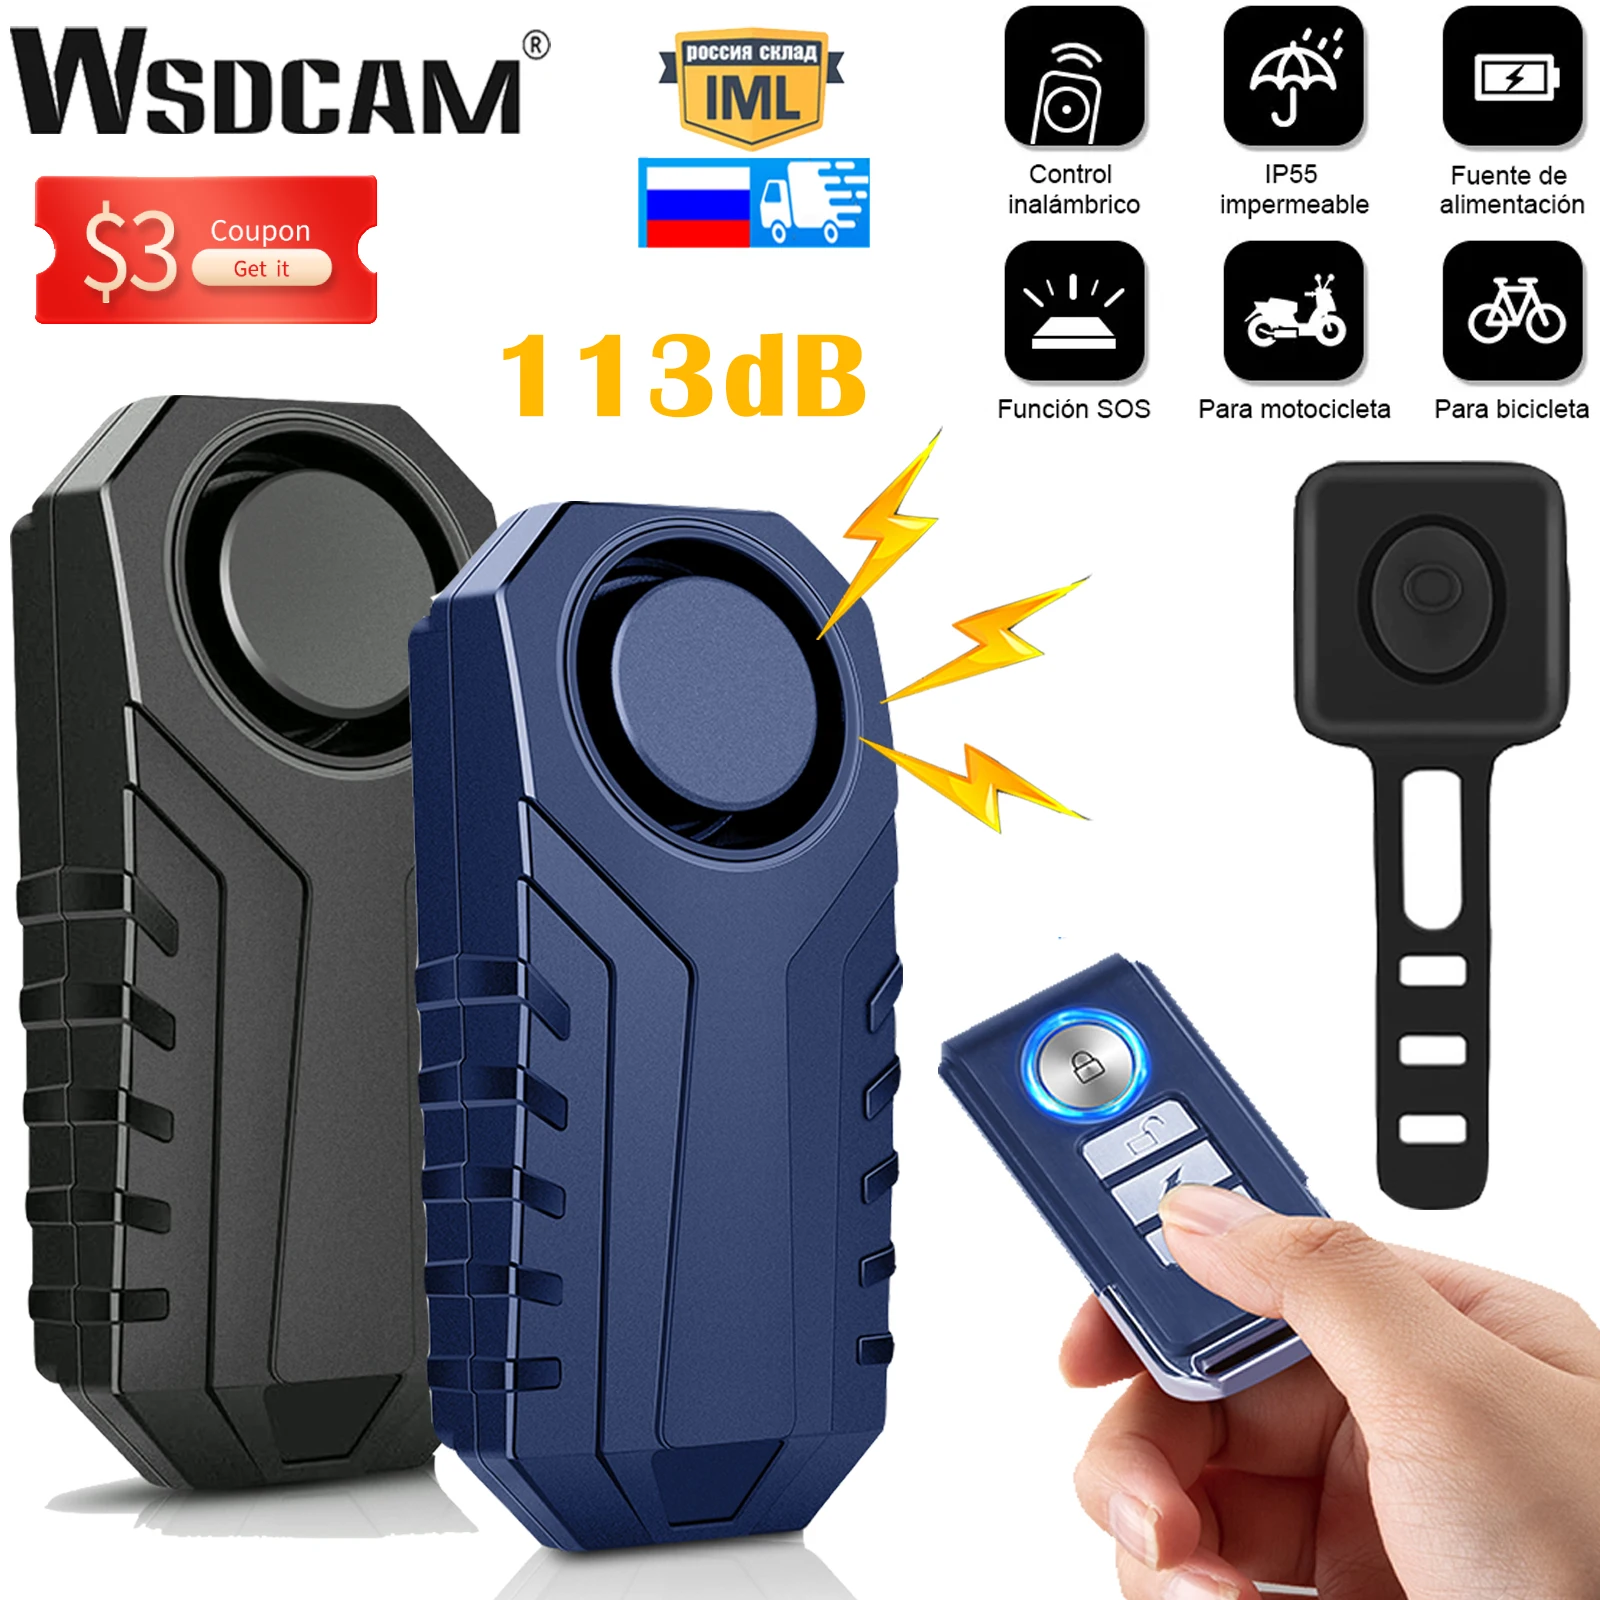 WSDCAM Motorcycle Remote Control Alarm 113dB Wireless Bike Anti Theft Alarm Security Protection Waterproof Electric Car Alarm Sy